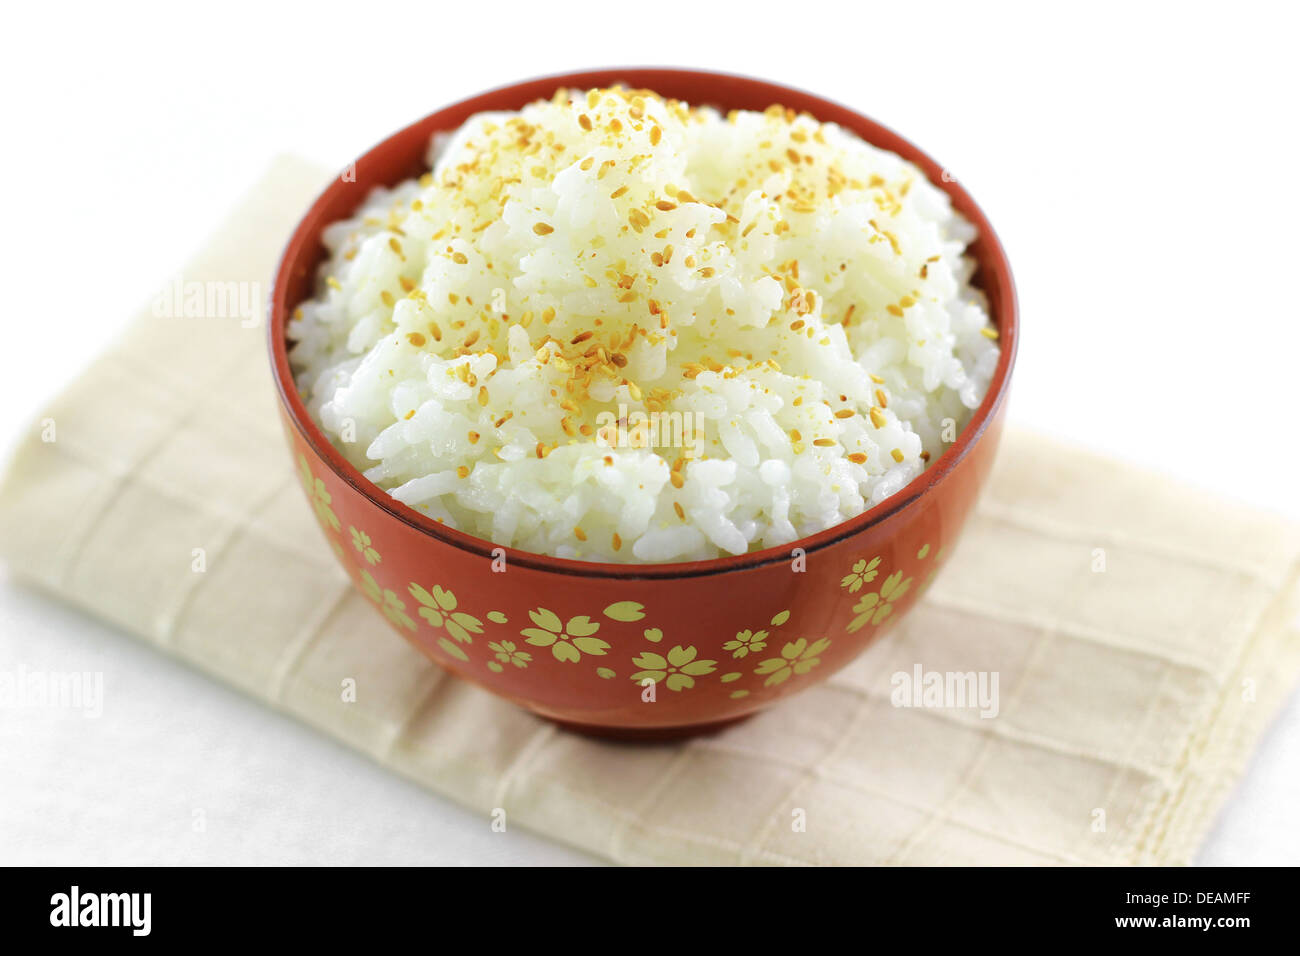 Japanese rice topped with roasted sesame seeds Stock Photo